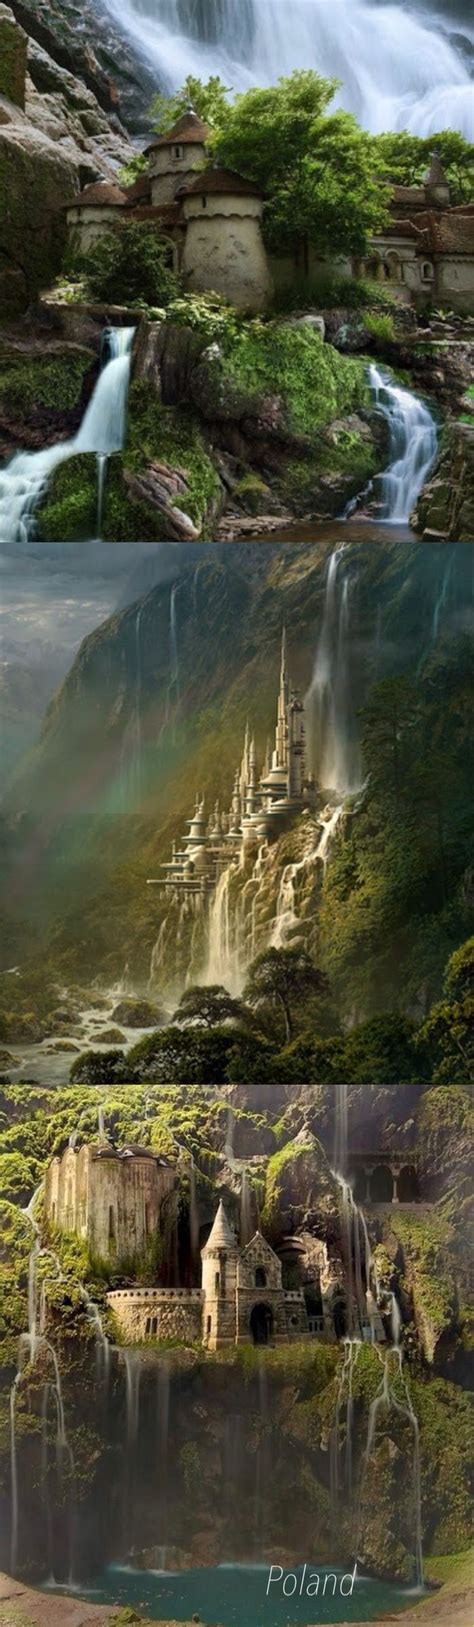 Waterfall Castle In Poland Has Got To Be The Epitome Of The Fairly Tale